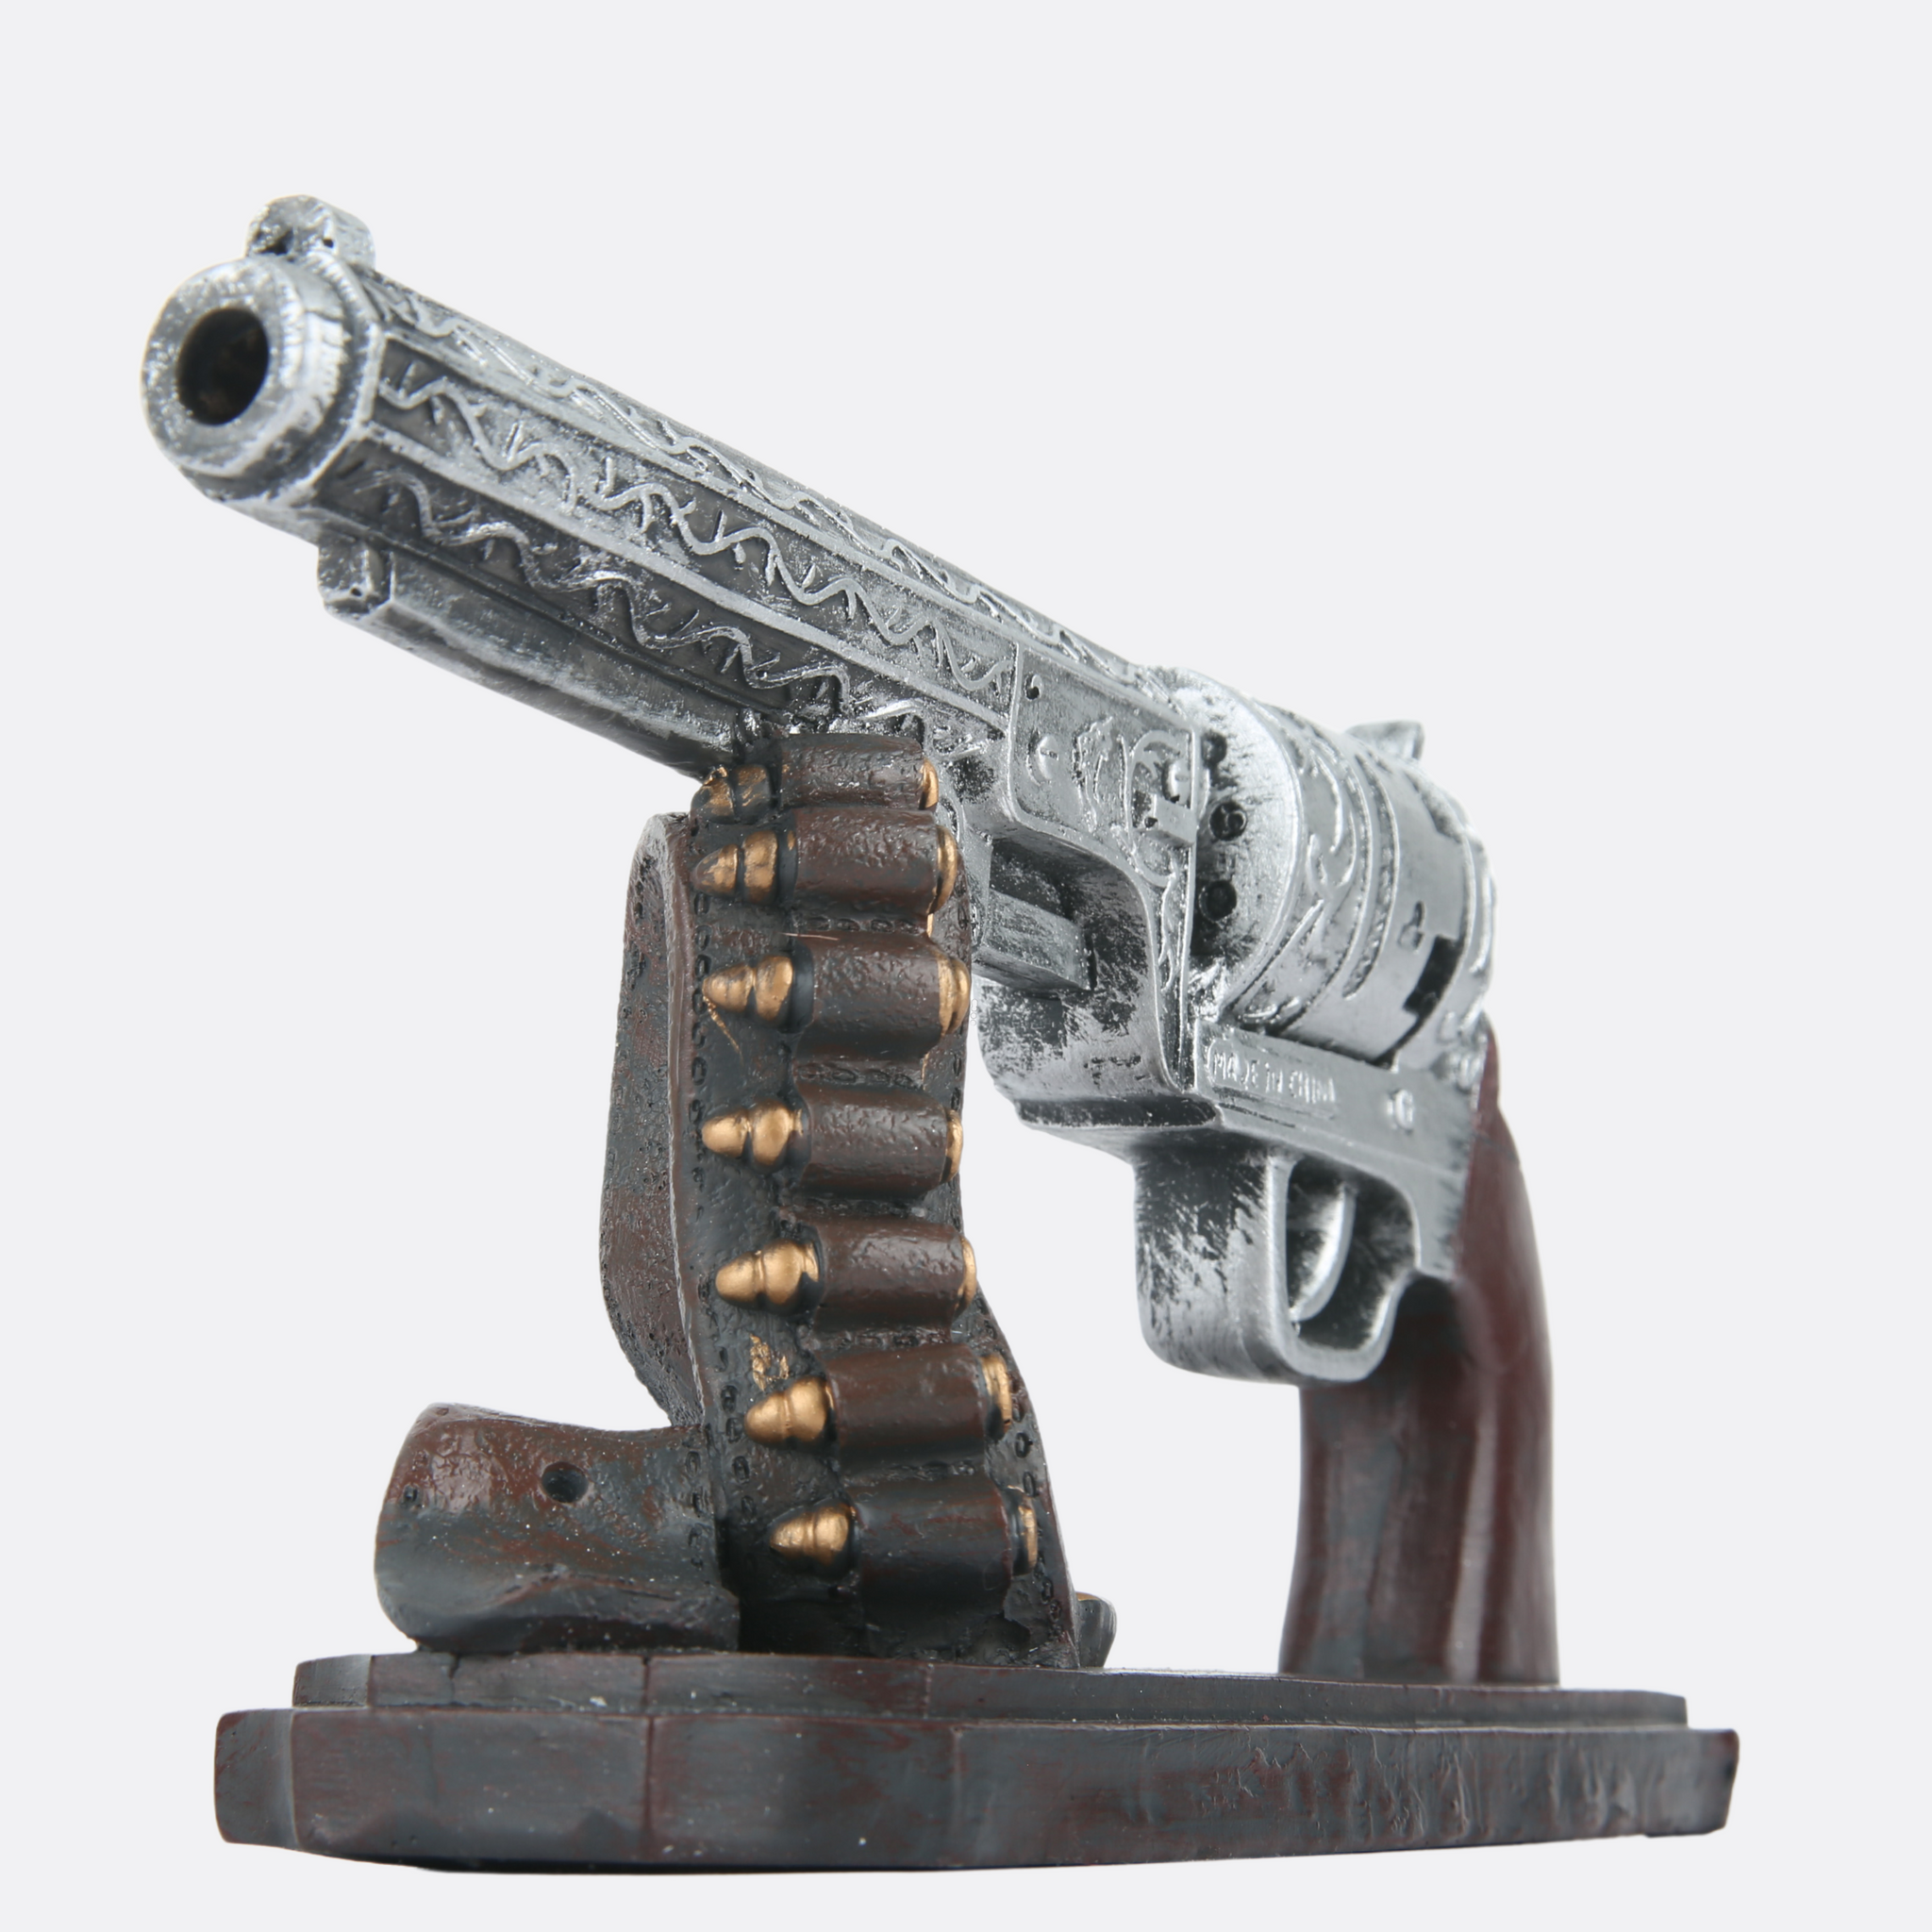 Decorative pistol with bullets